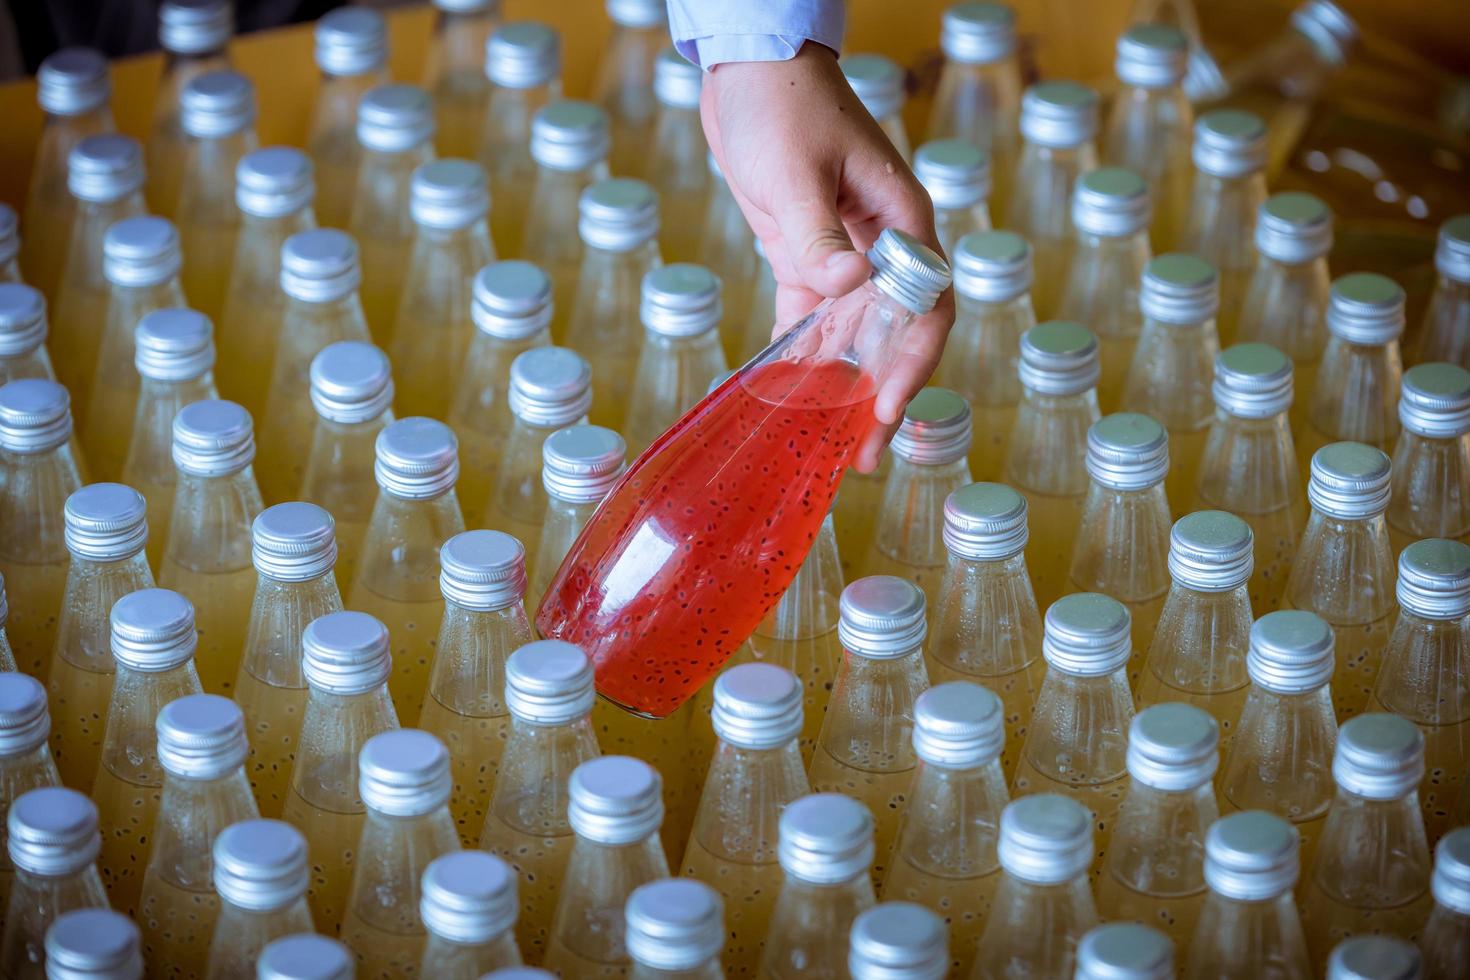 Bottles from Basil seed beverage factory conveyor belt with bottles for juice or water to distribution in business. photo